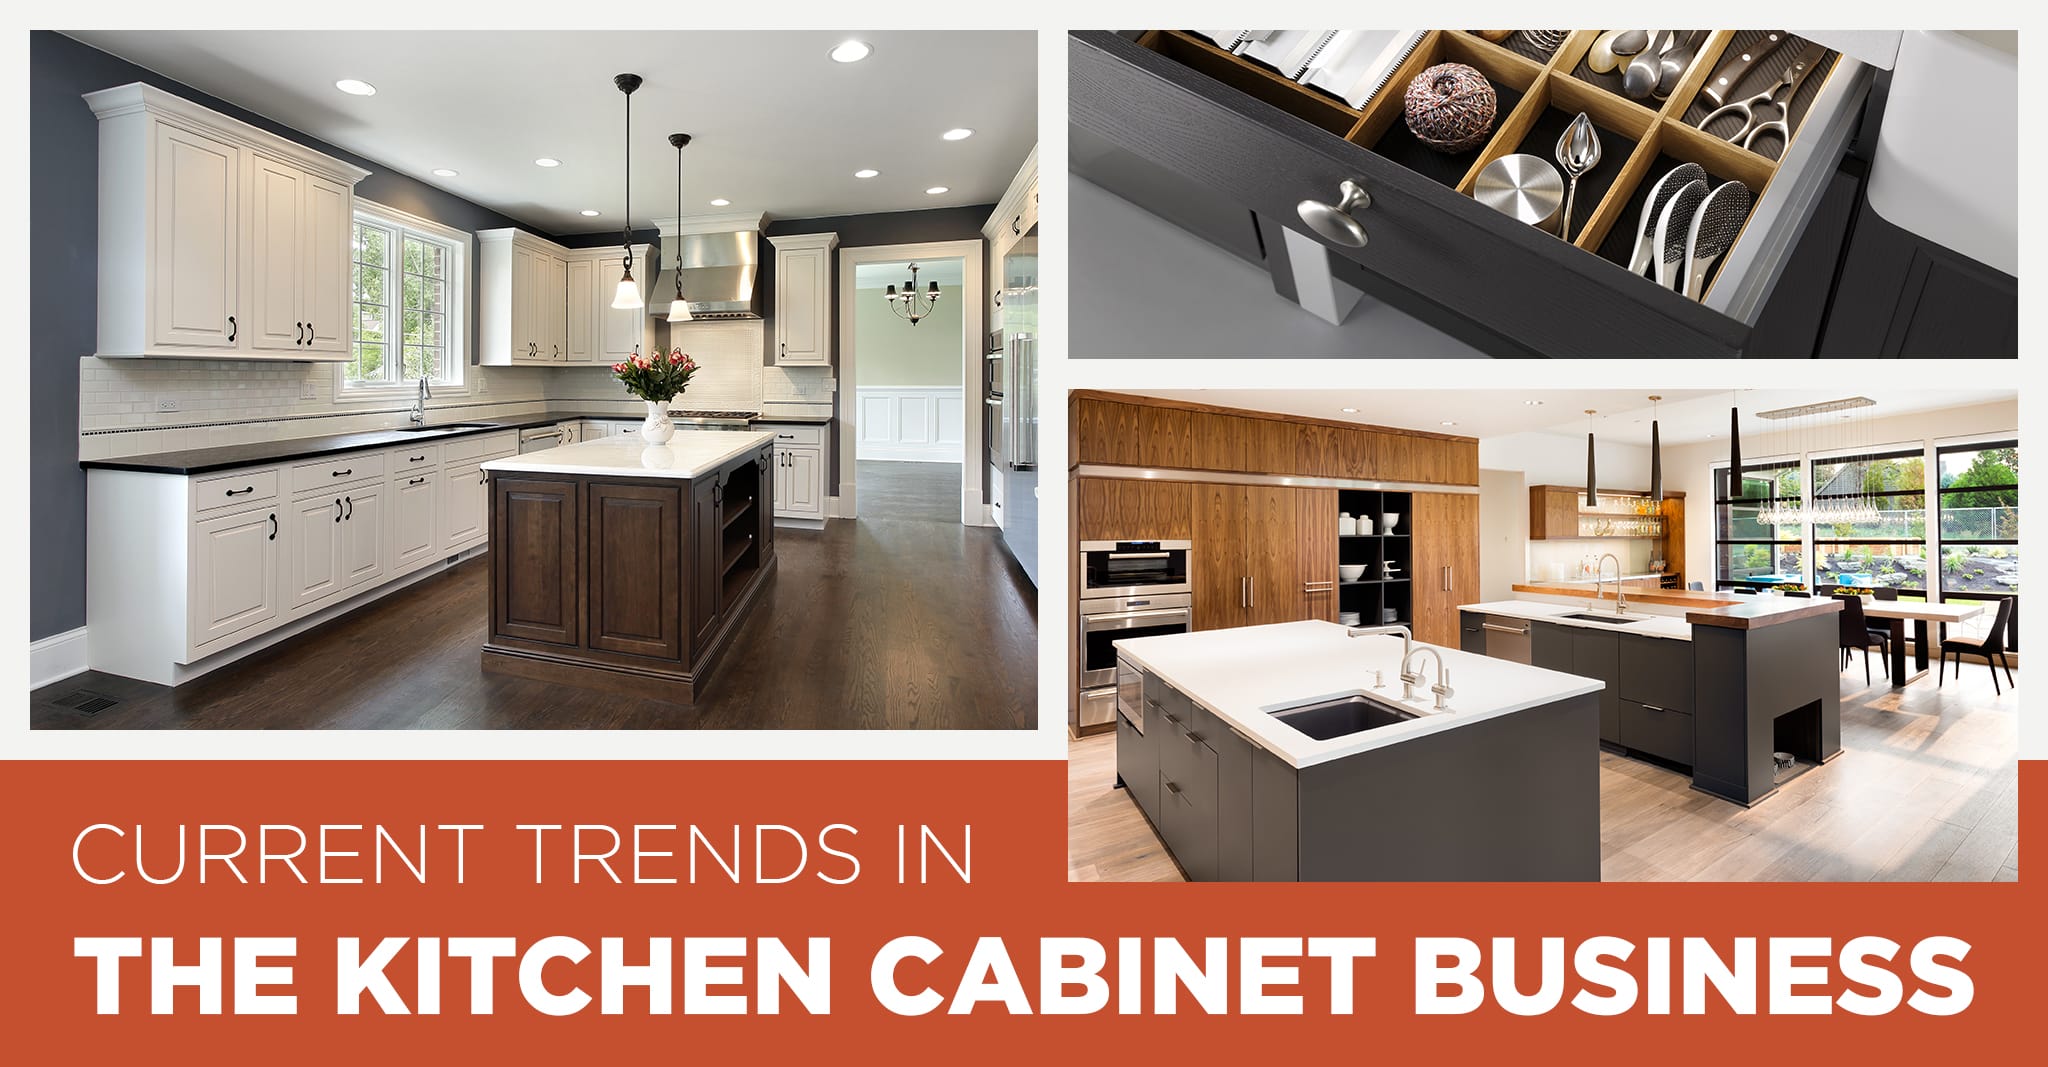 How to Promote Kitchen Cabinet Business  